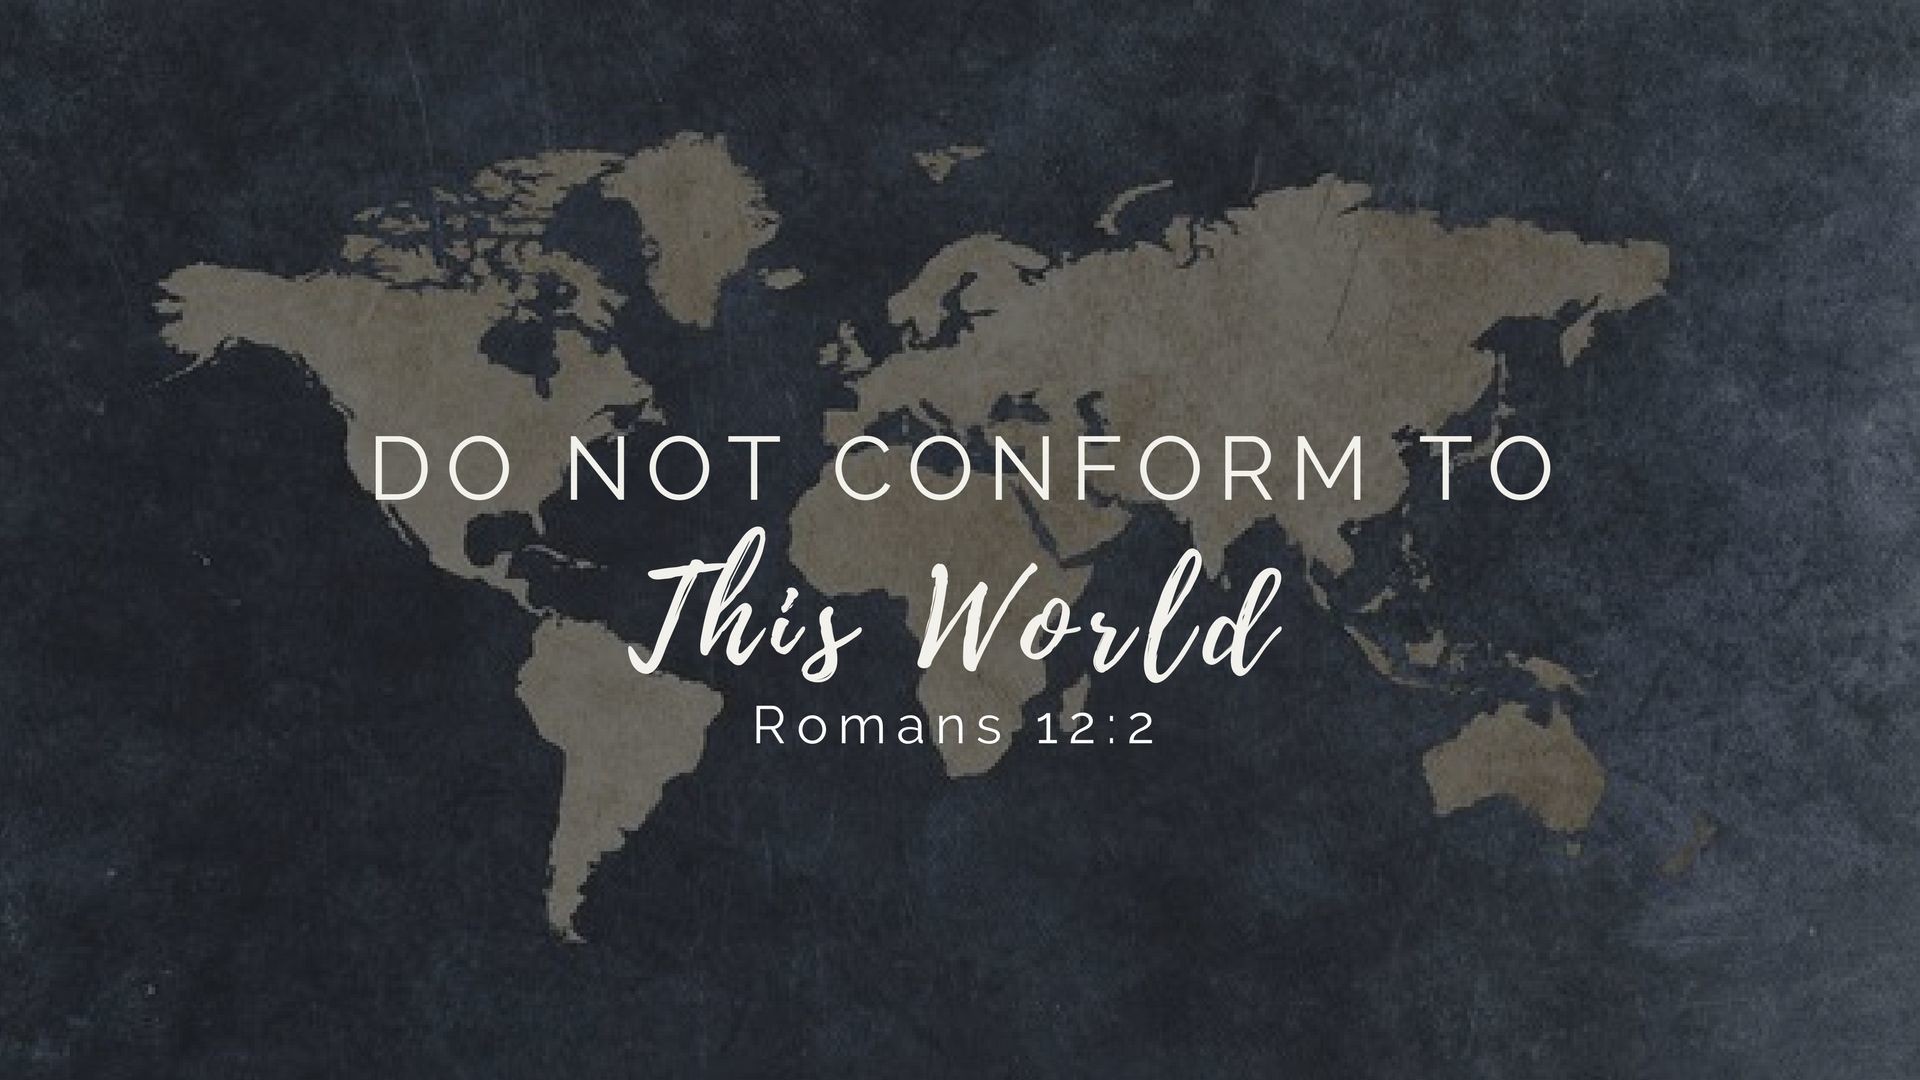 1920x1080 Do not conform to this world Romans 2:12